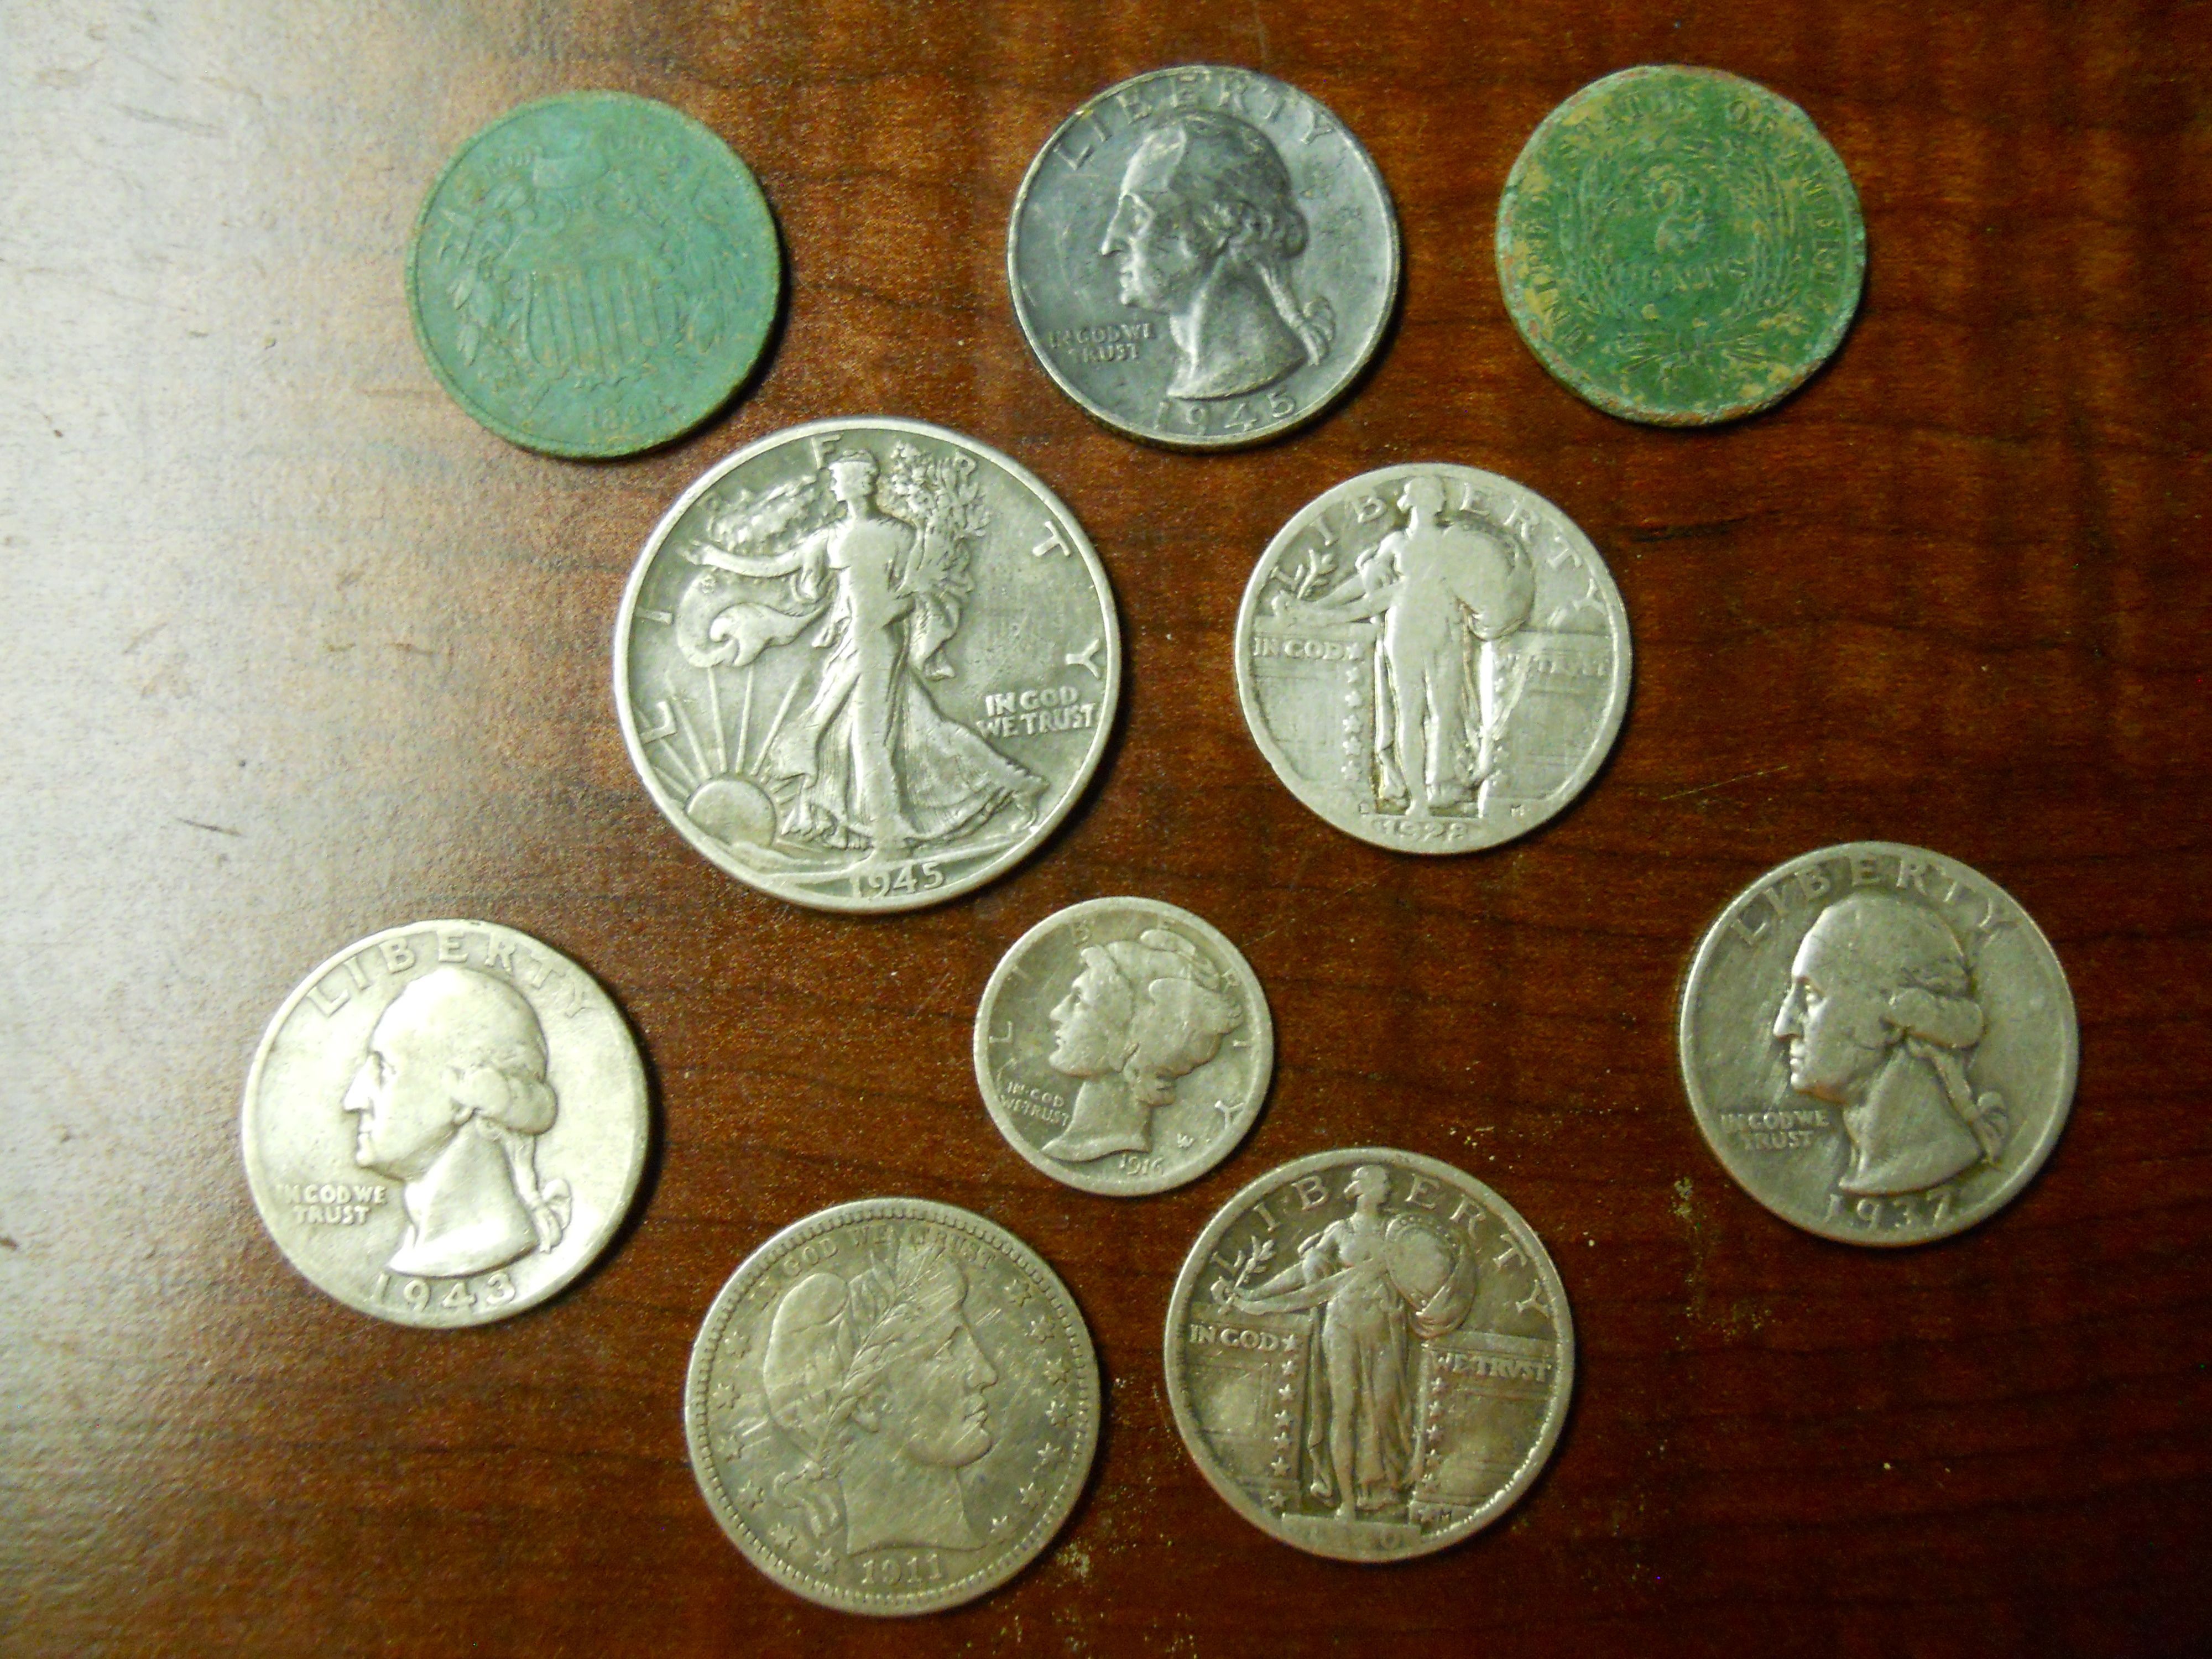 Some silver